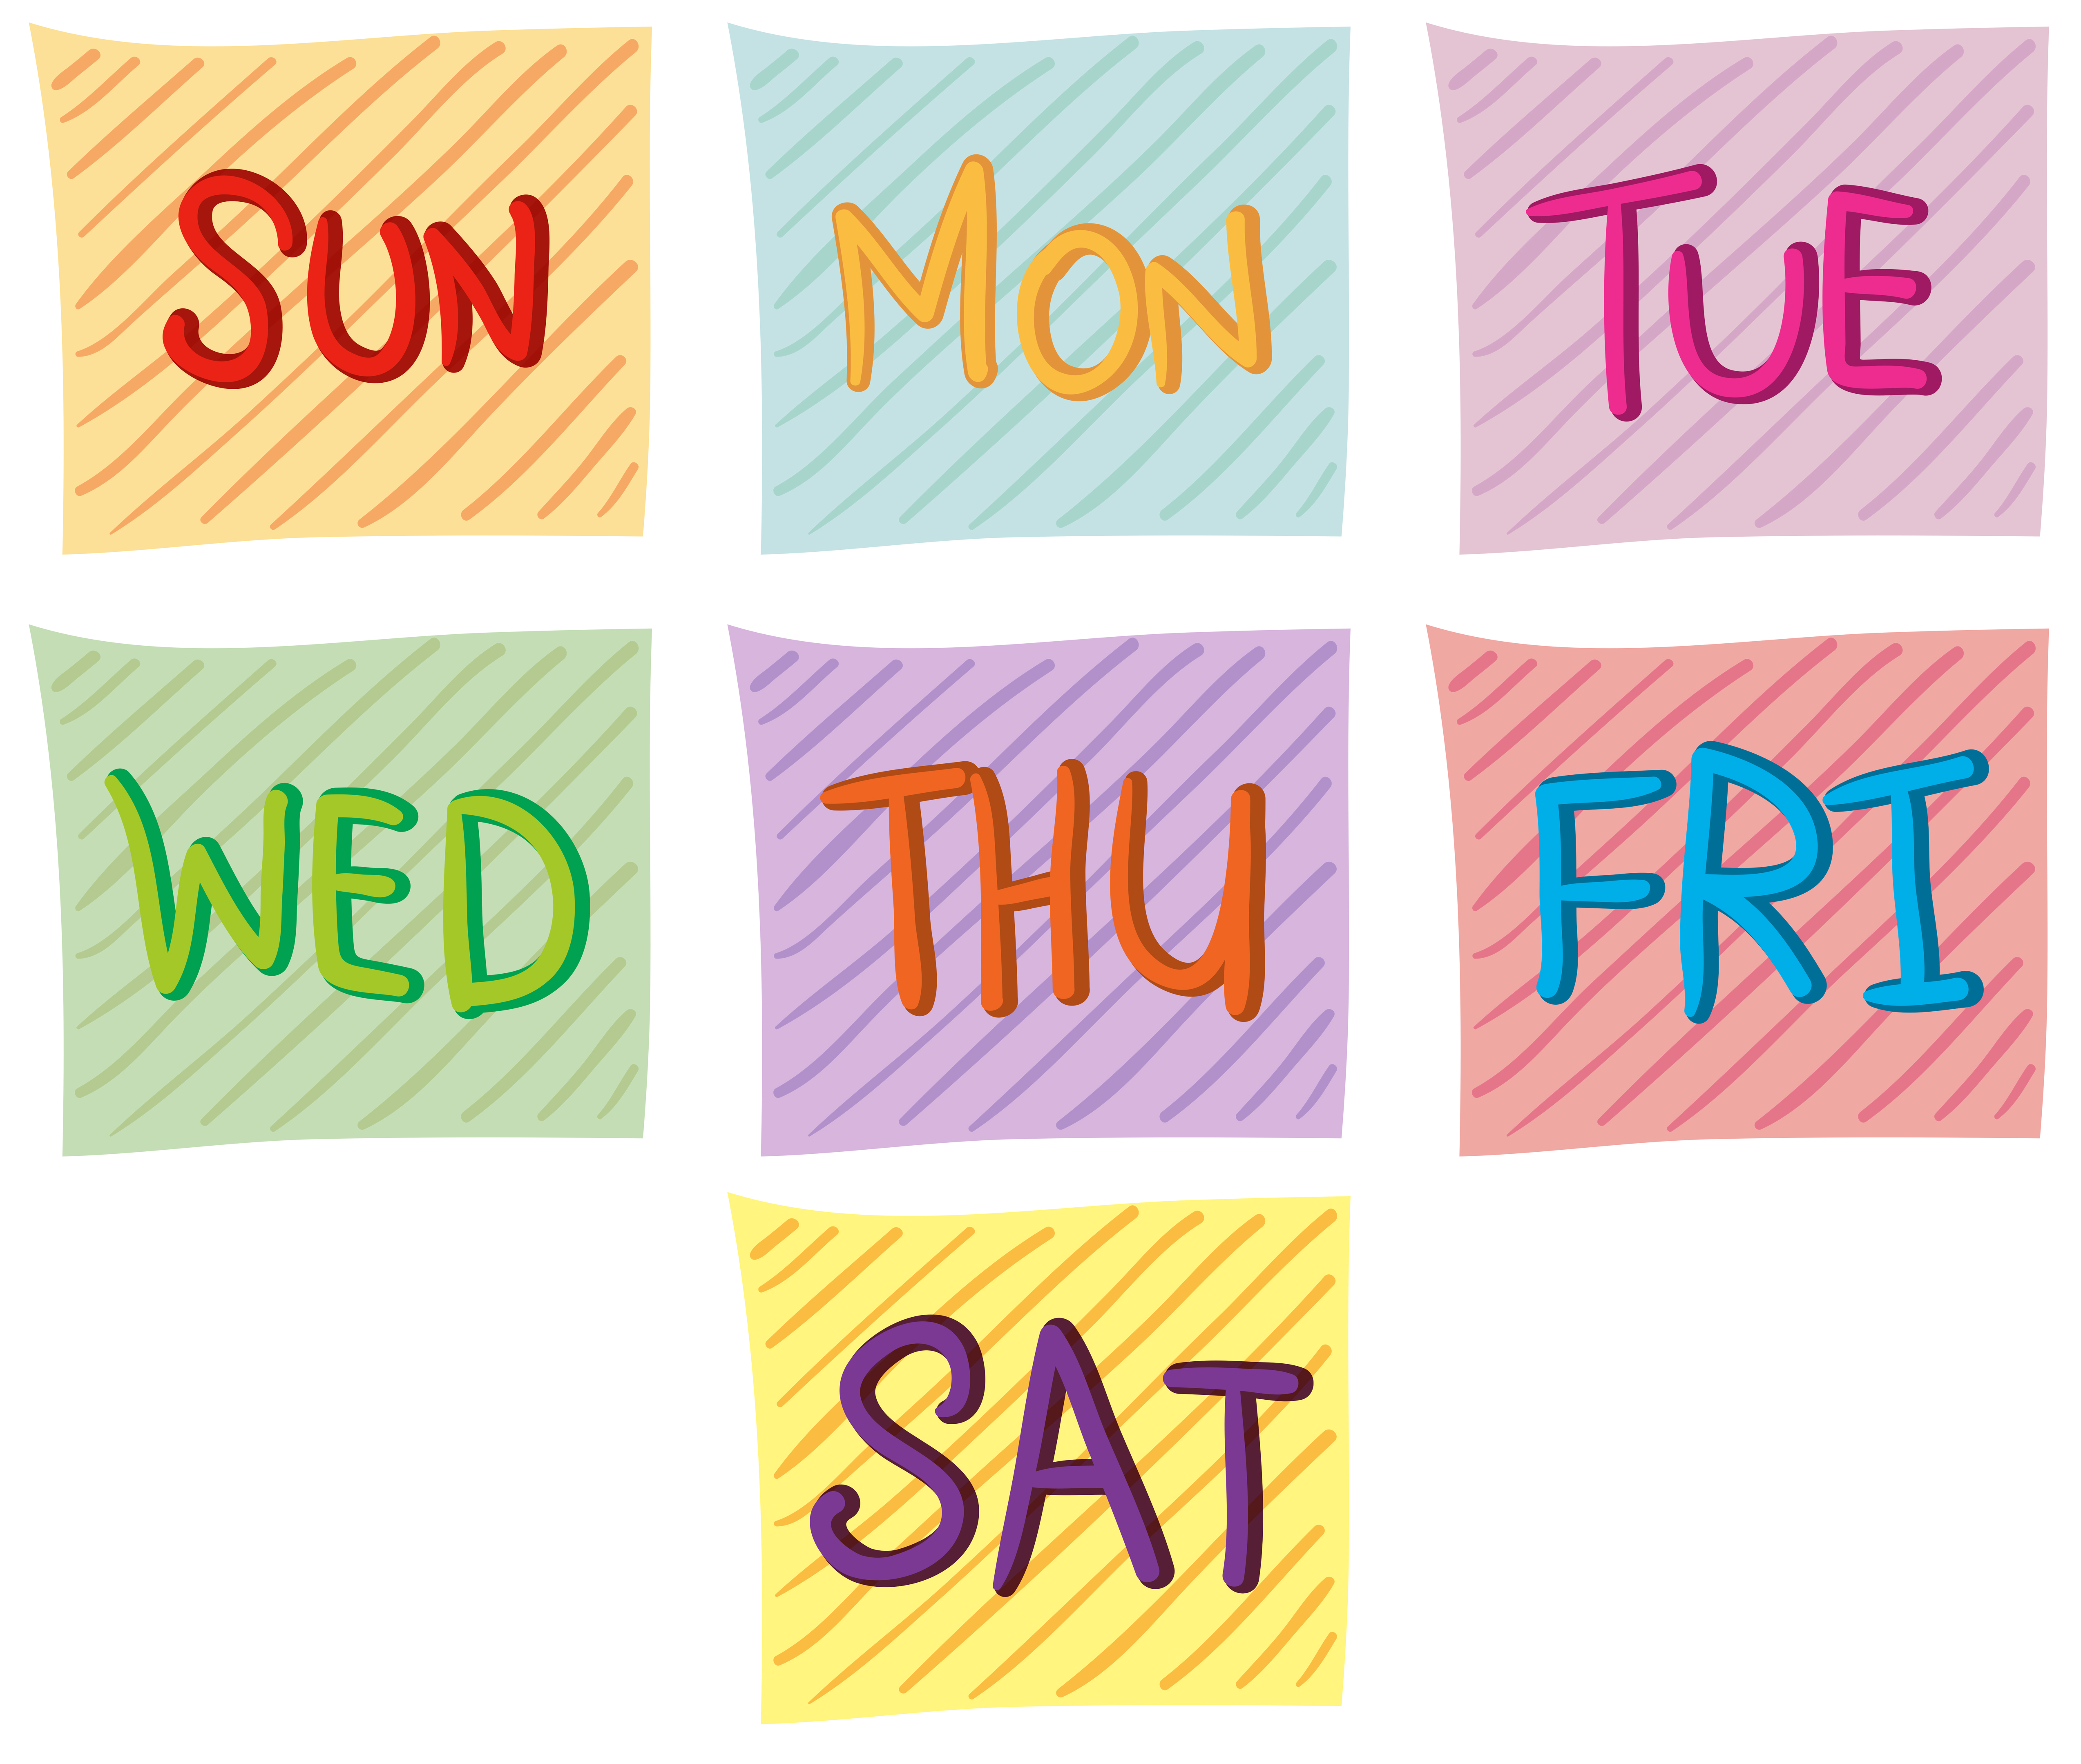 Days Of The Week Clipart Clipart Station - Bank2home.com